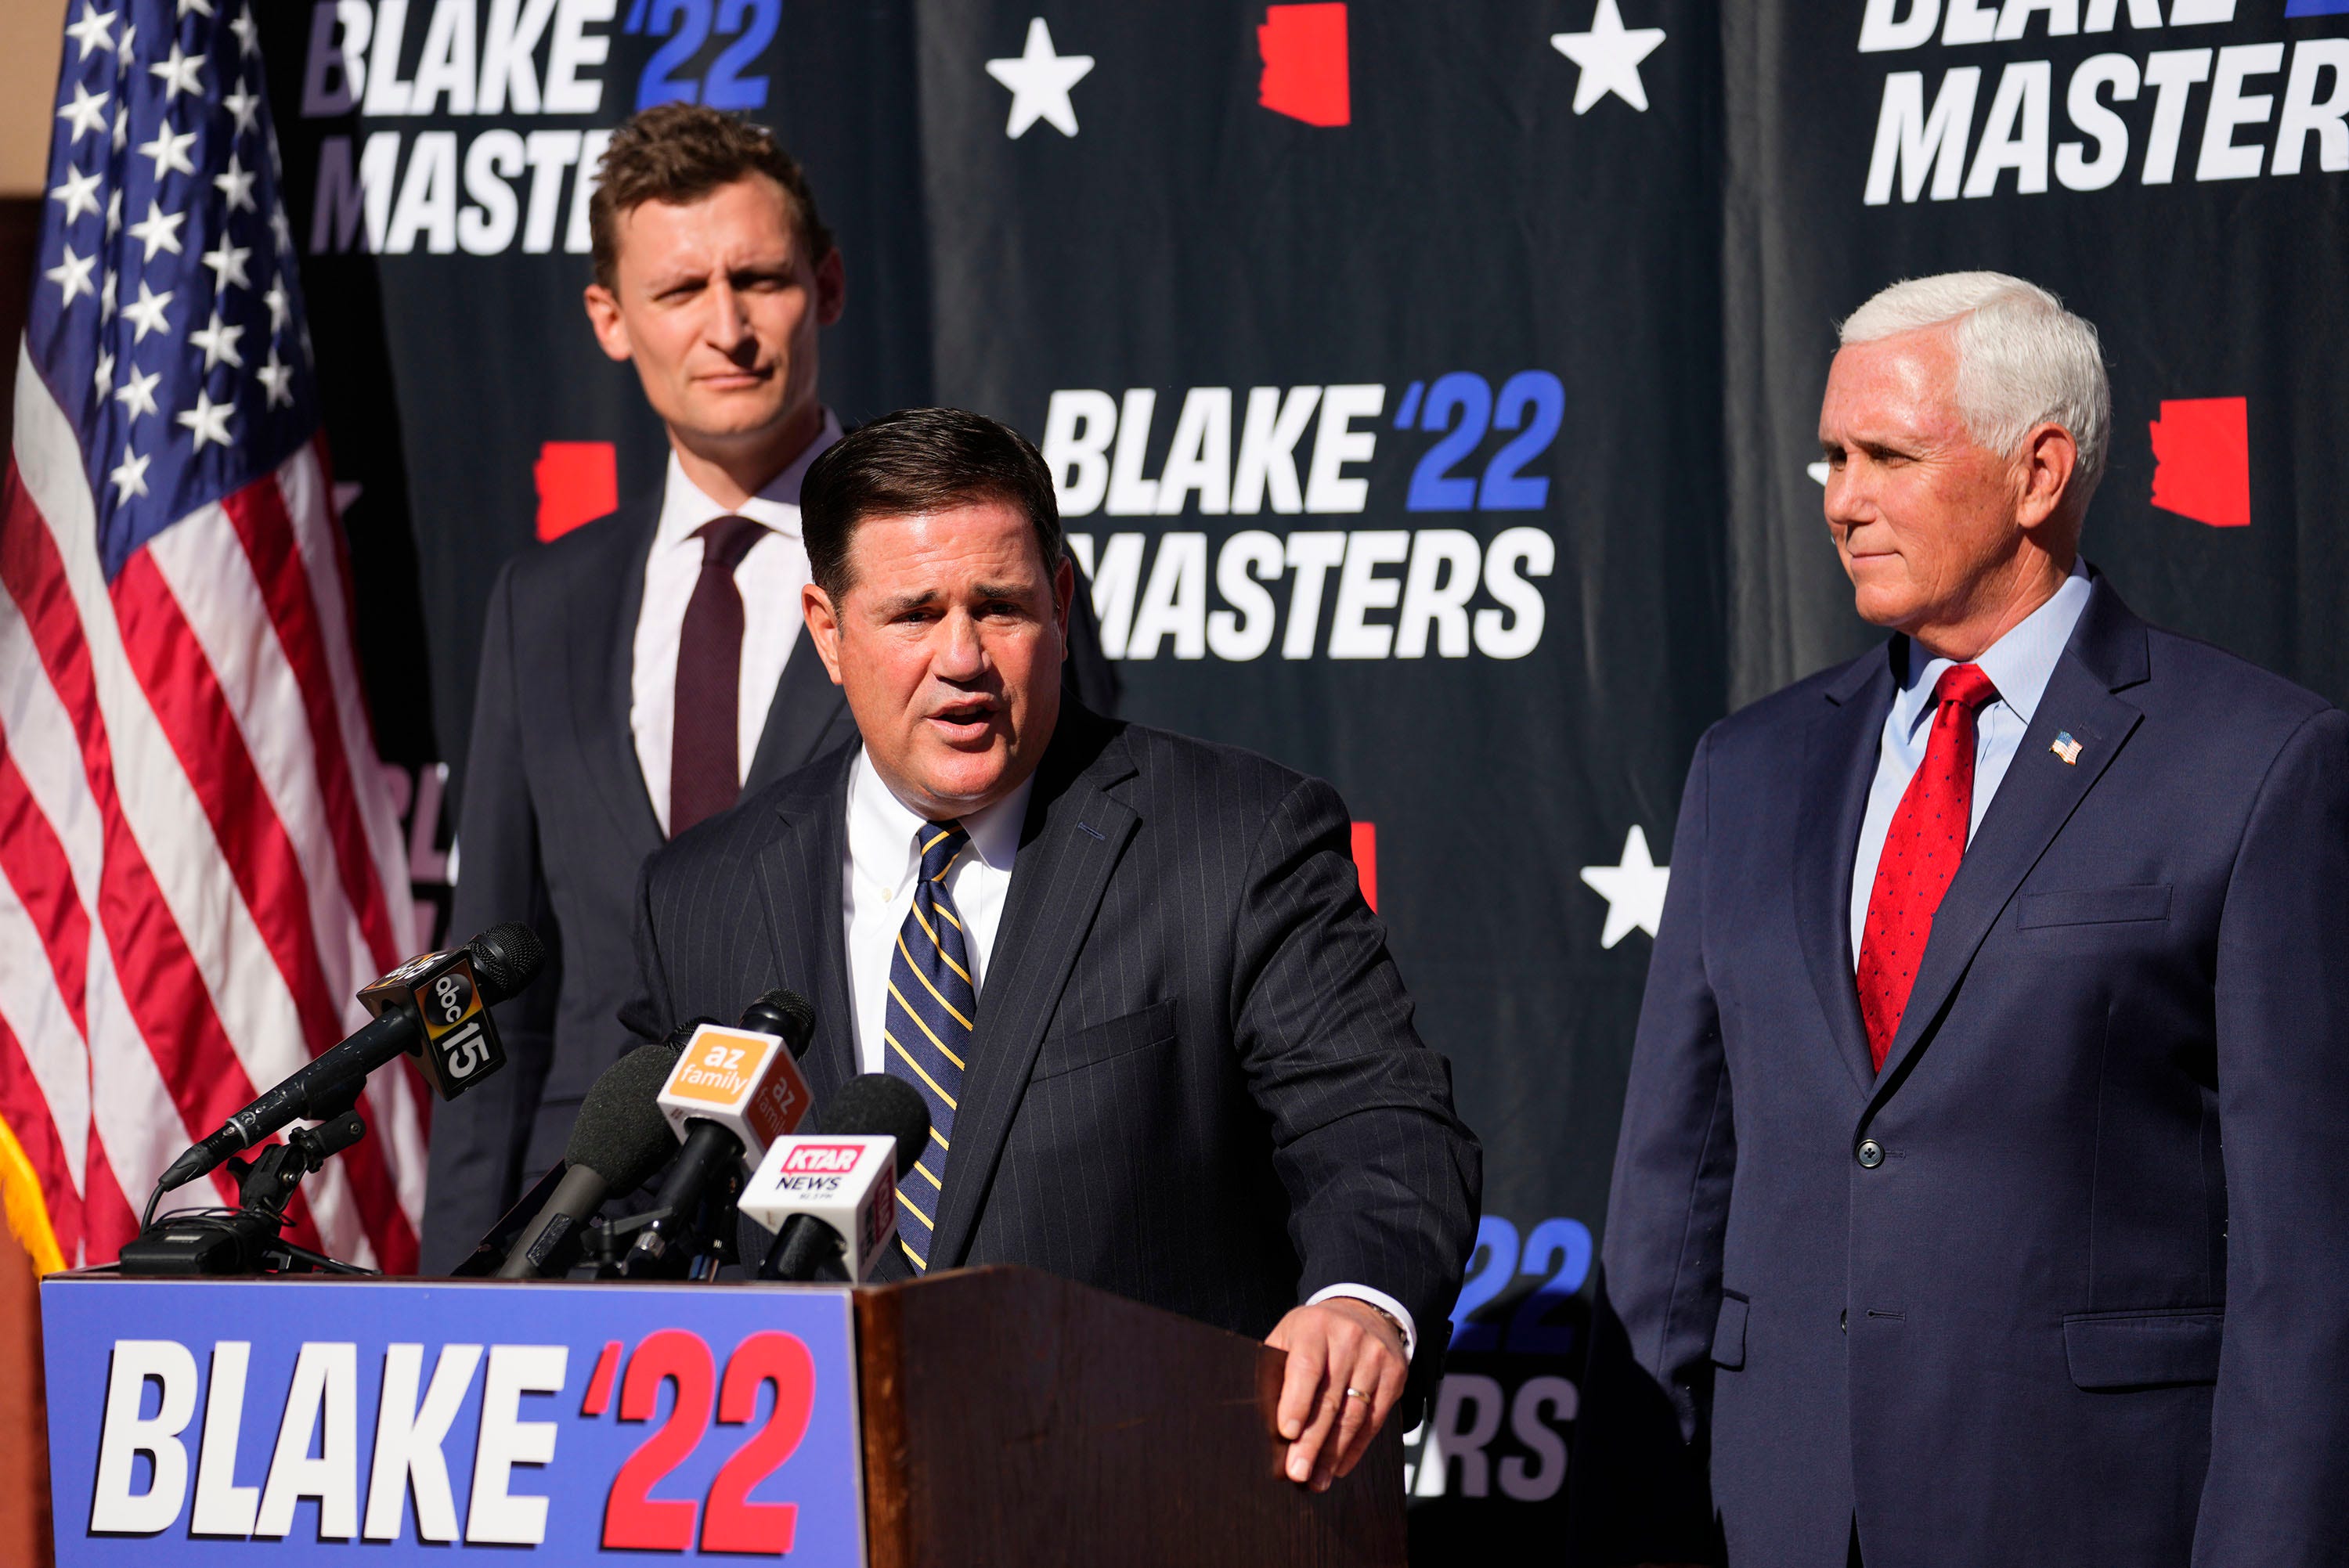 Republican Blake Masters, a U.S. Senate candidate in Arizona, holds a press conference with Arizona Gov. Doug Ducey and former Vice President Mike Pence at a school choice event earlier this month.